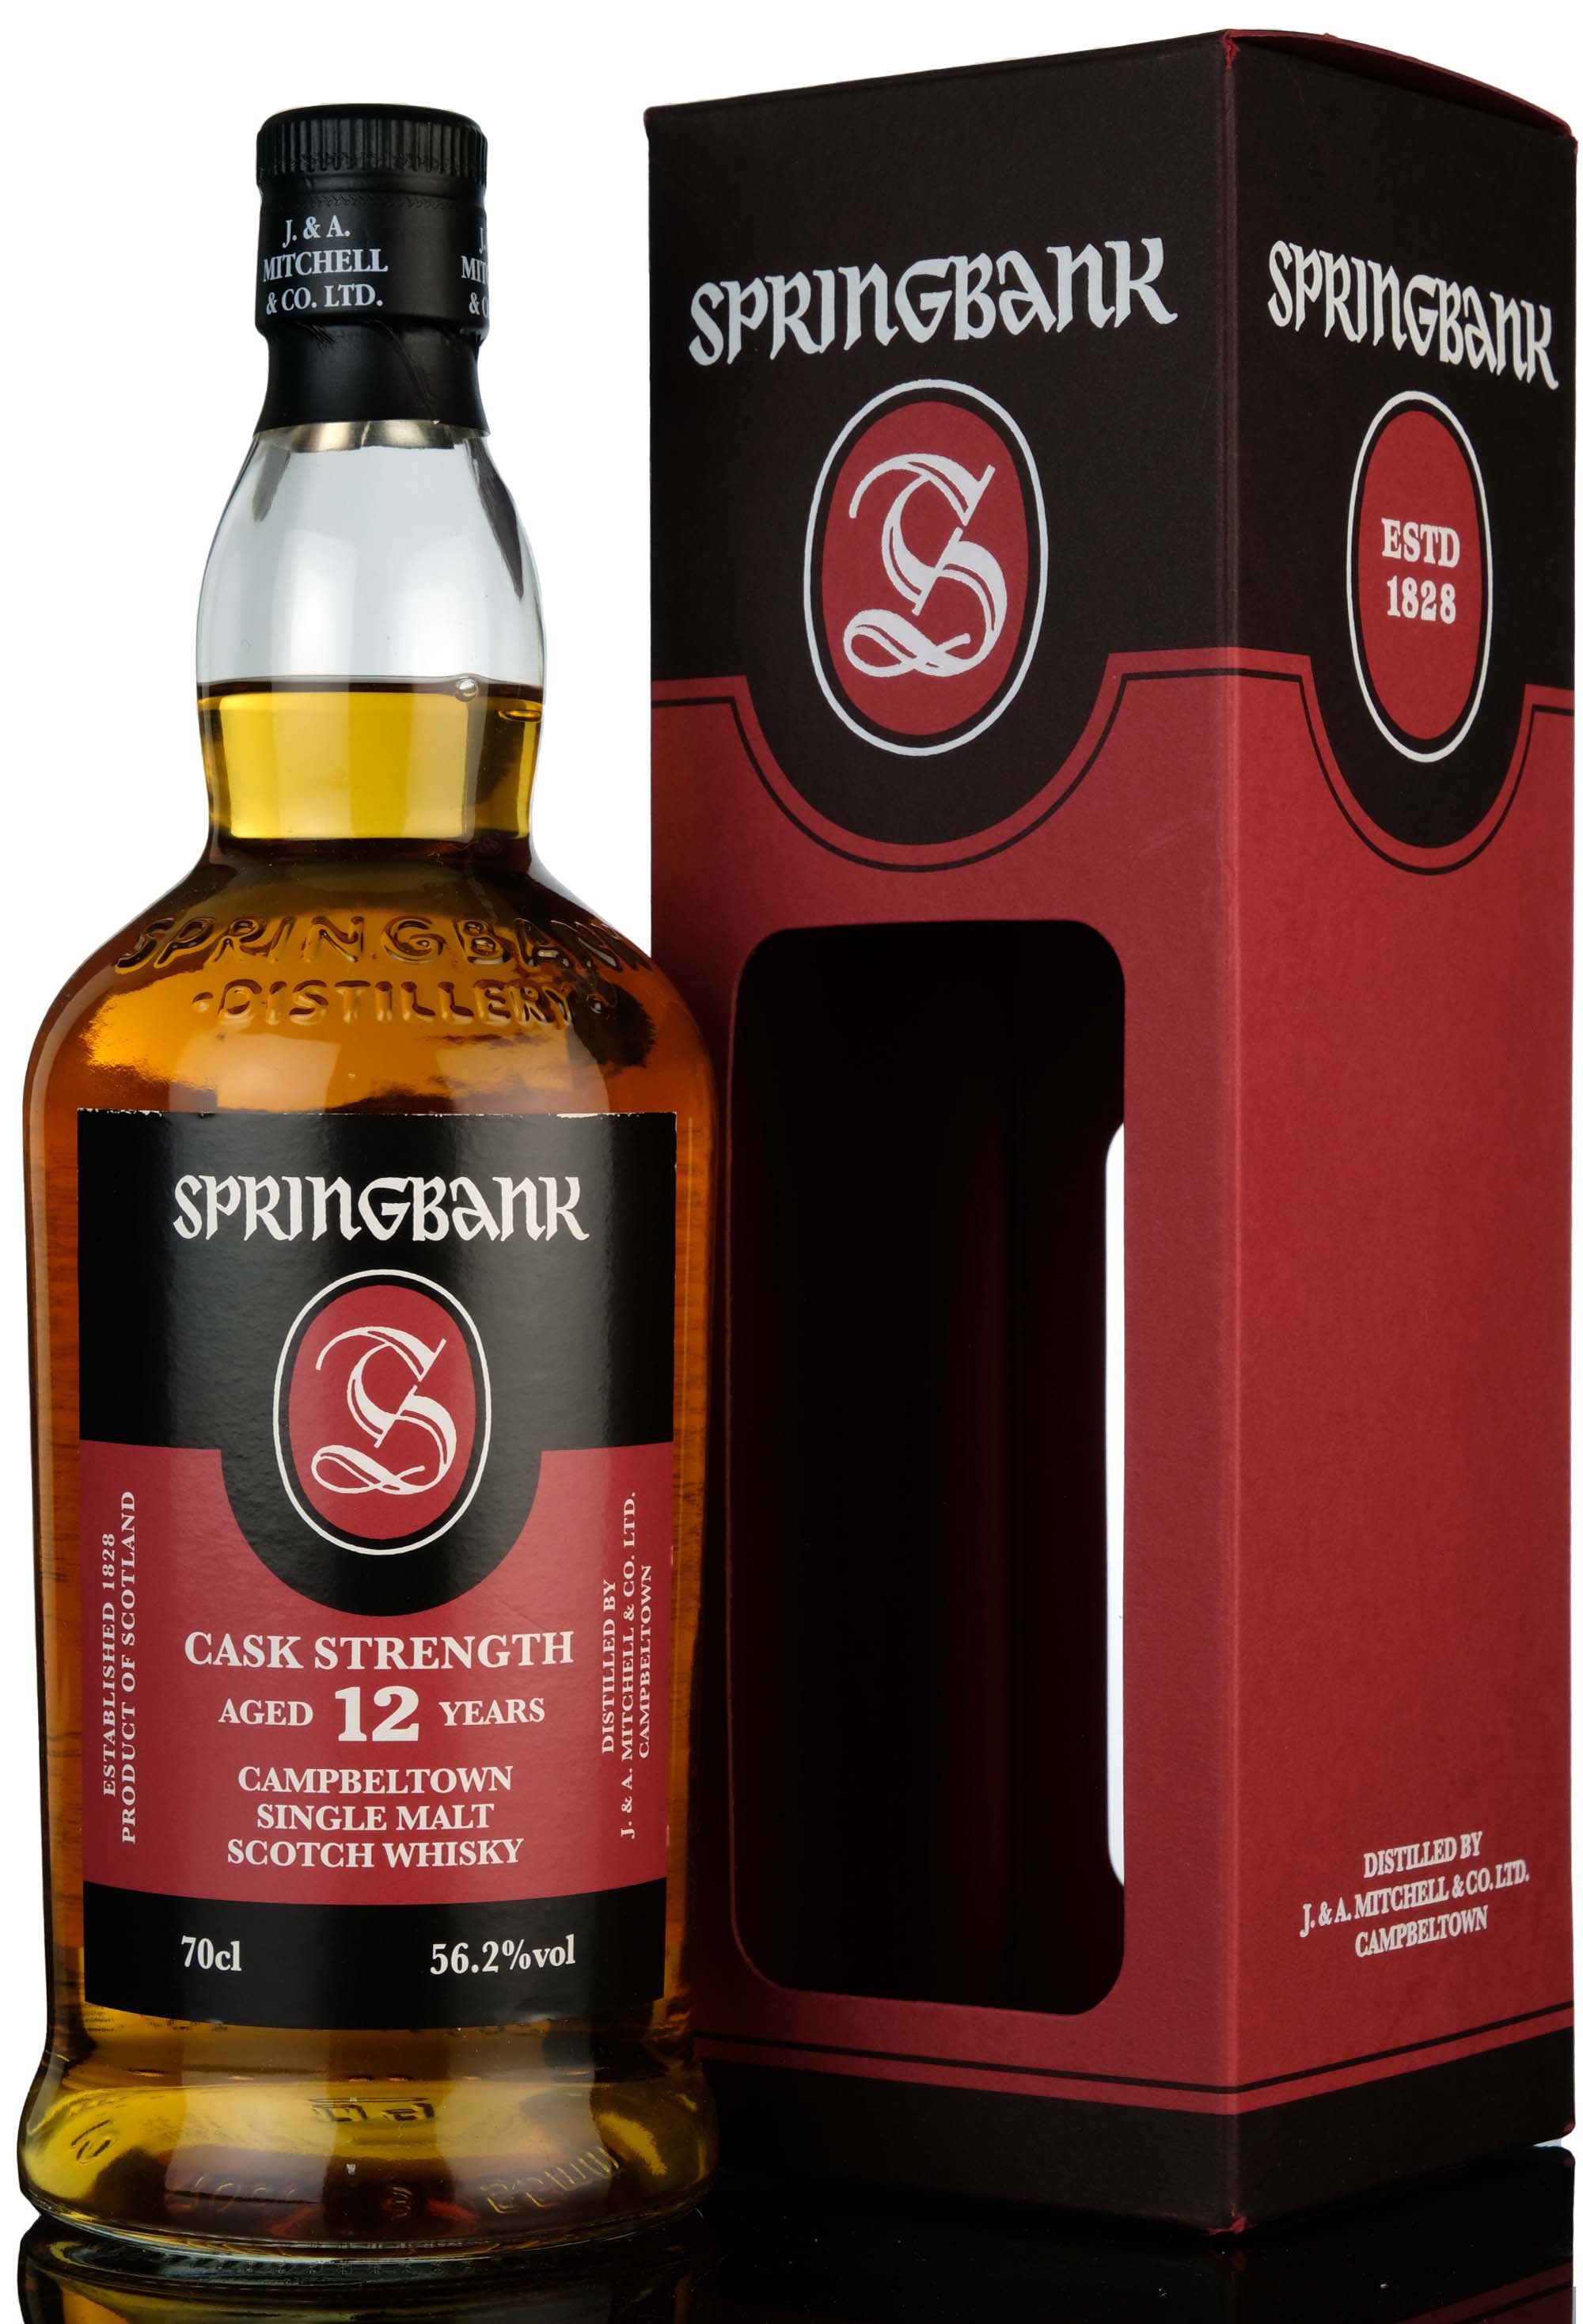 Springbank 12 Year Old - Cask Strength 56.2% - 2018 Release